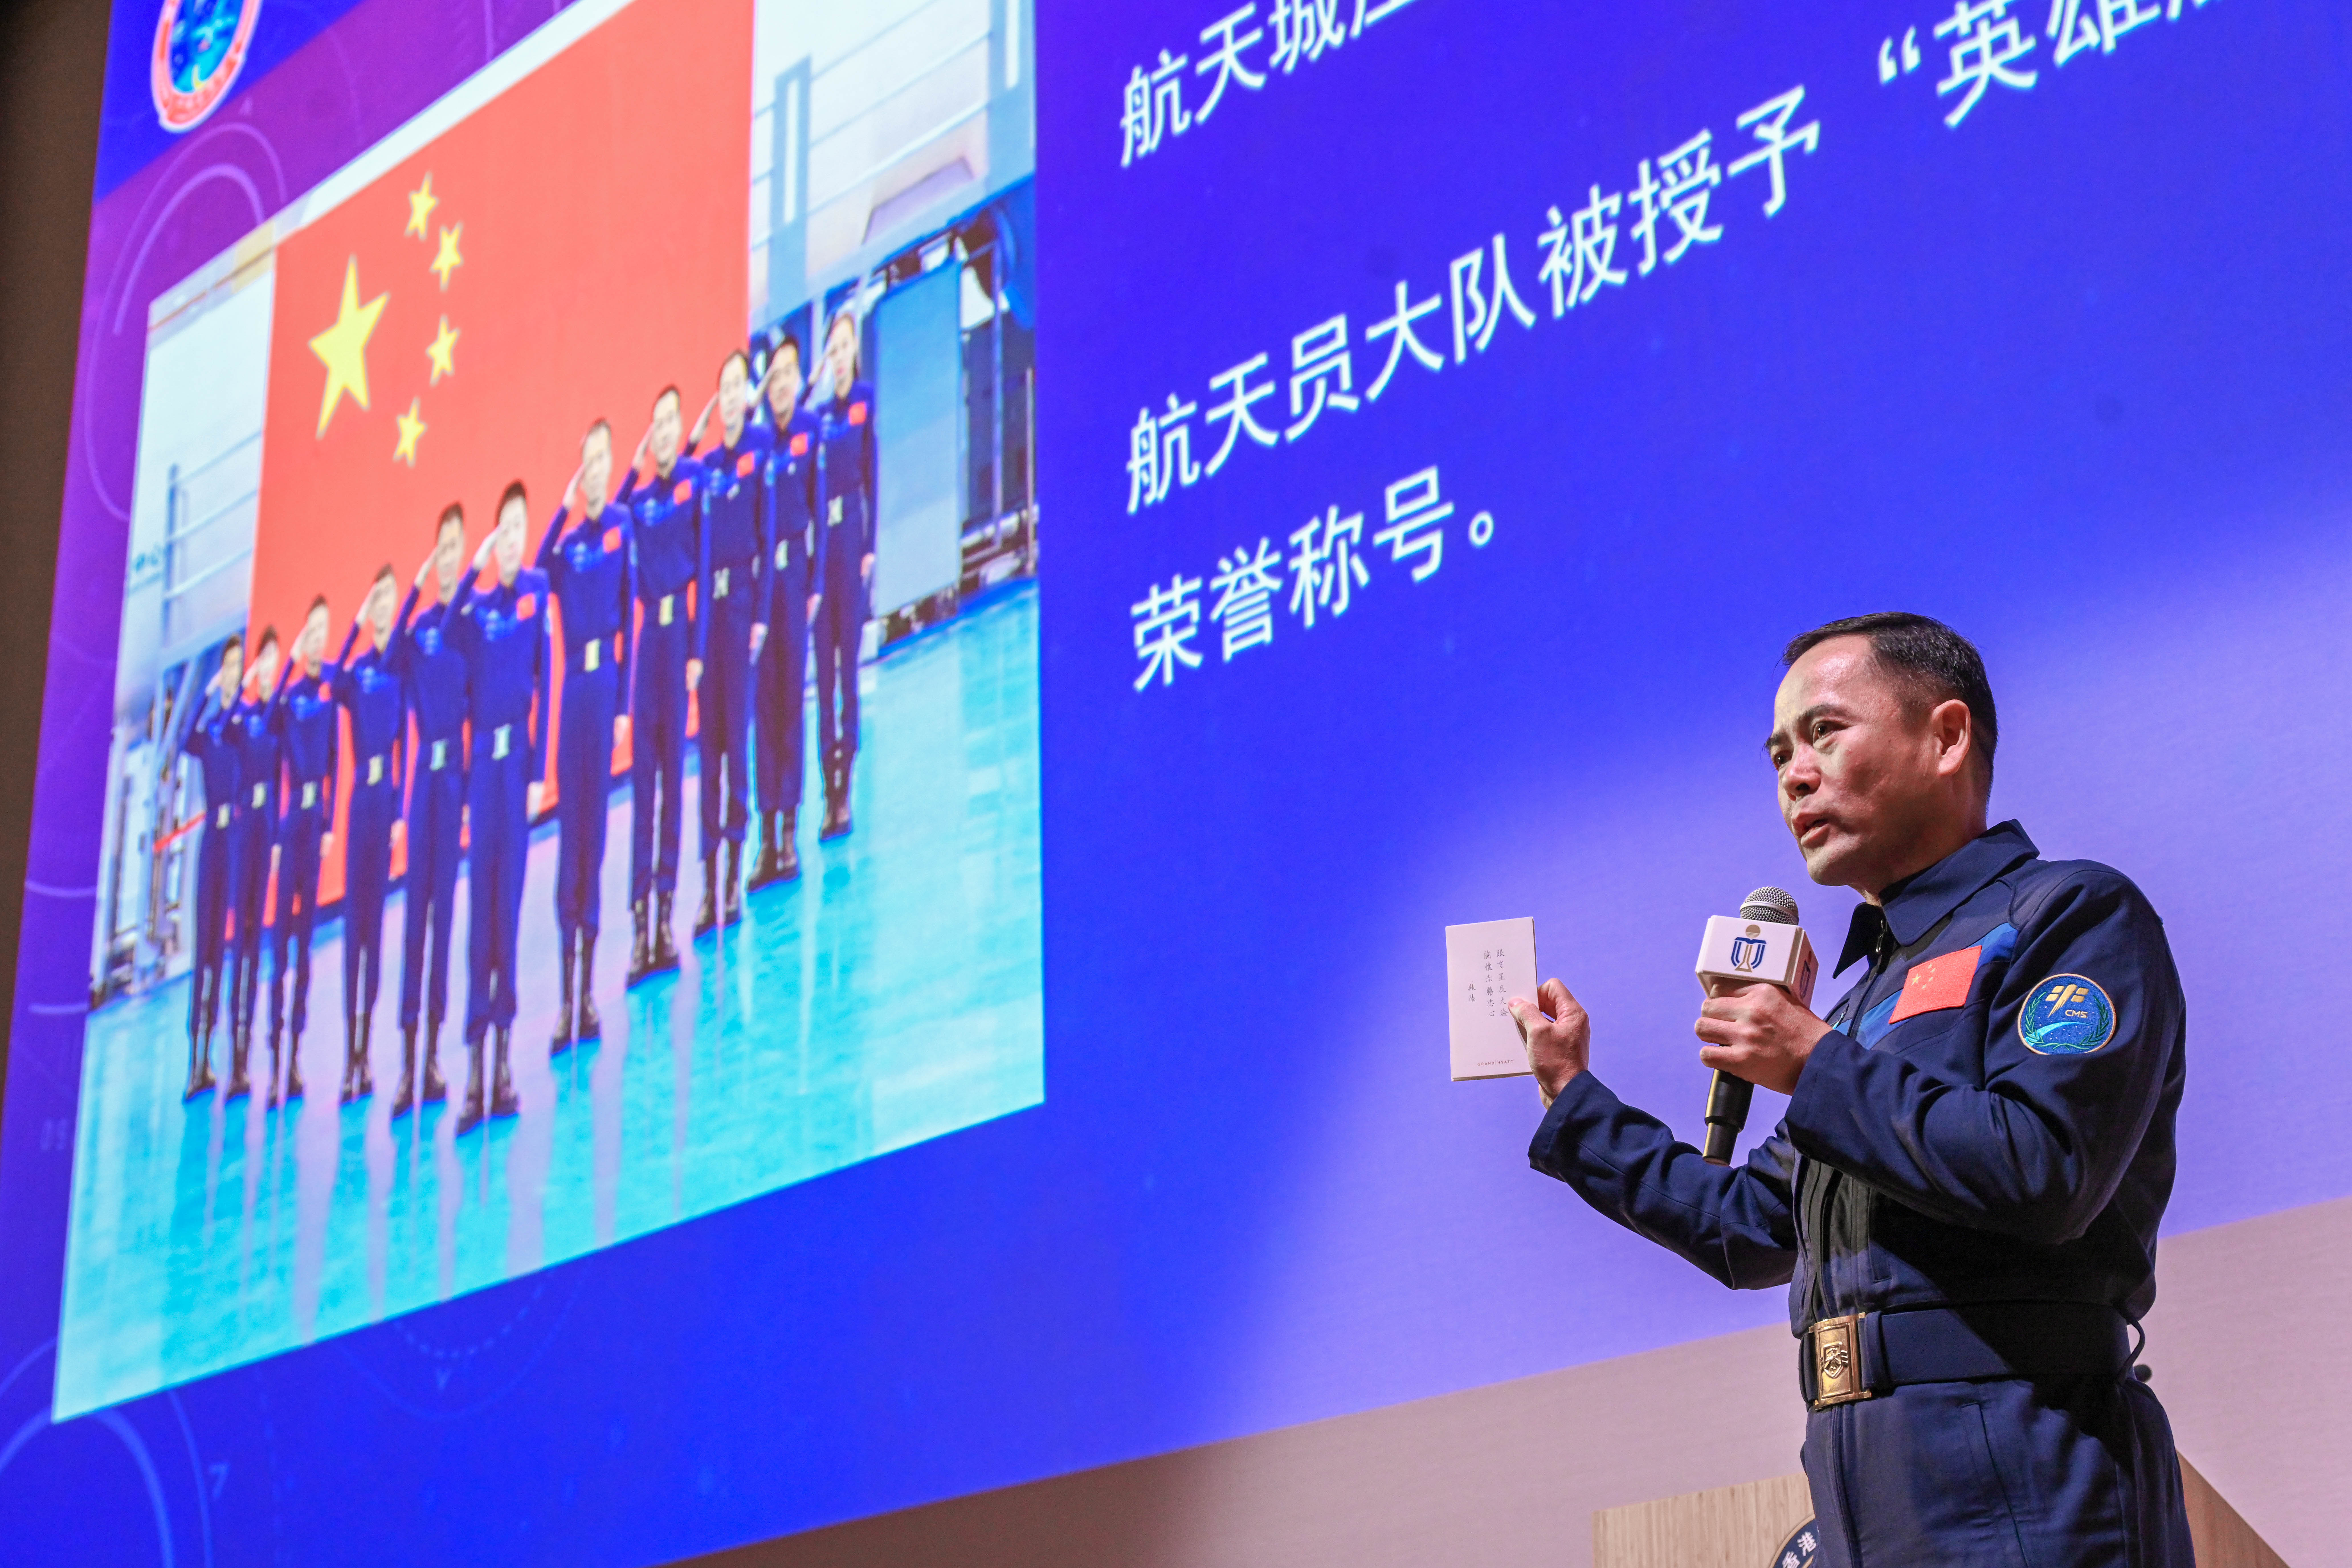 The China Manned Space delegation continued their visit in Hong Kong today (November 30). Photo shows Shenzhou-15 astronaut Mr Zhang Lu attending the dialogue session with teachers and students held at the Hong Kong University of Science and Technology.